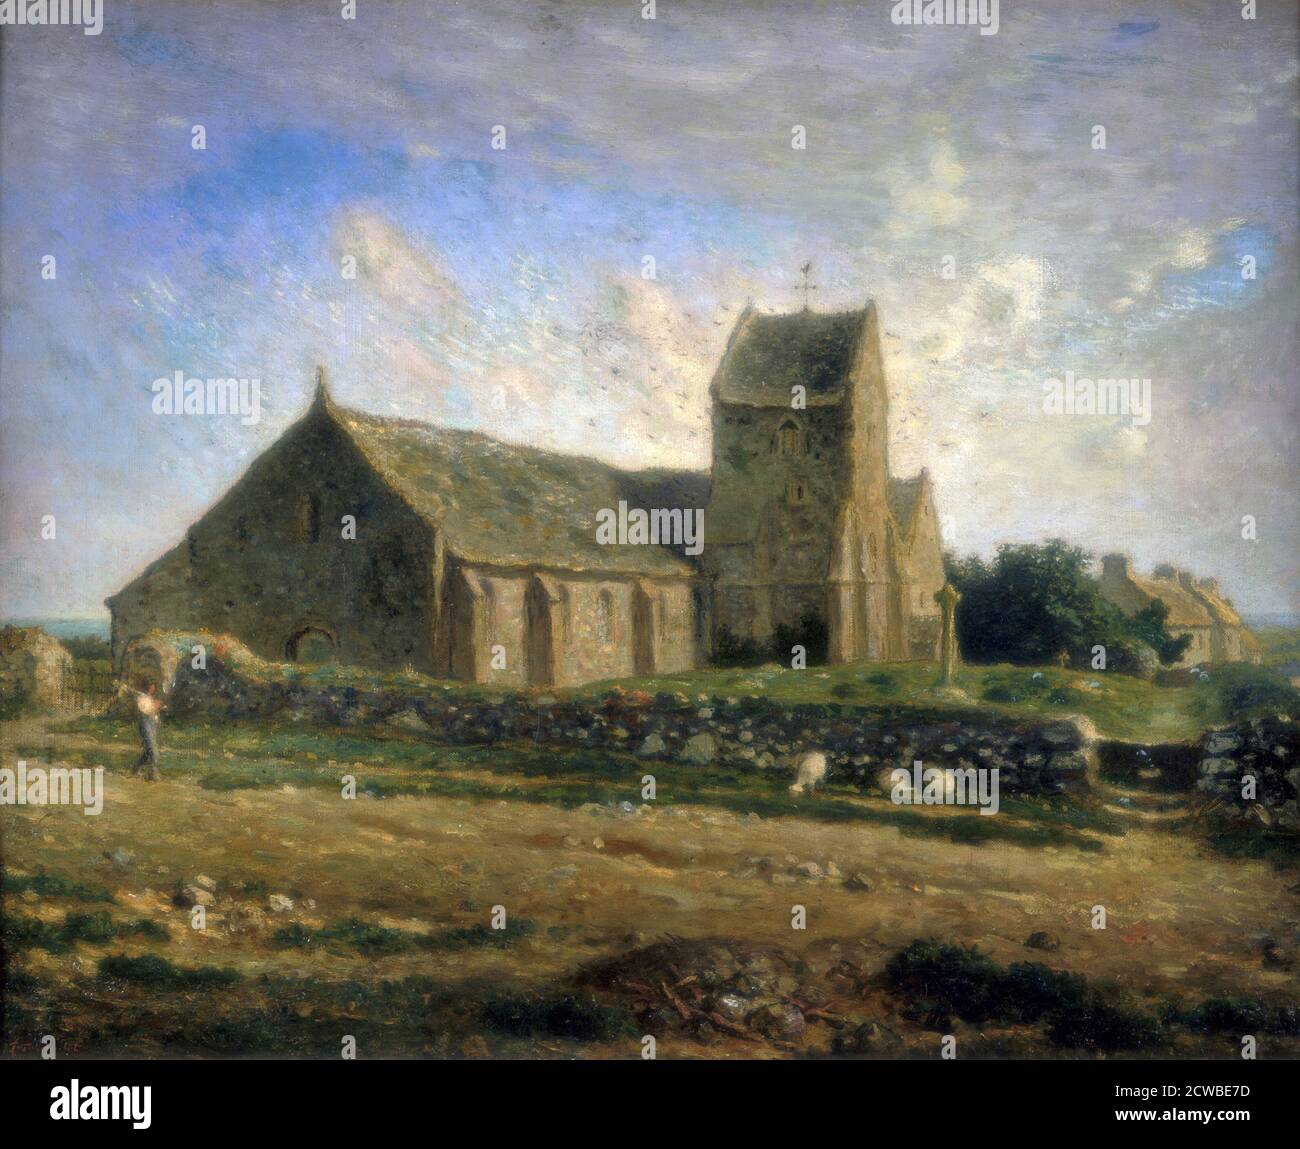 The Church at Greville', c1871-1874. Artist: Jean Francois Millet. Jean-Francois Millet(1814-1875) was a French artist and one of the founders of the Barbizon school in rural France. Millet is noted for his paintings of peasant farmers and can be categorized as part of the Realism art movement. Stock Photo